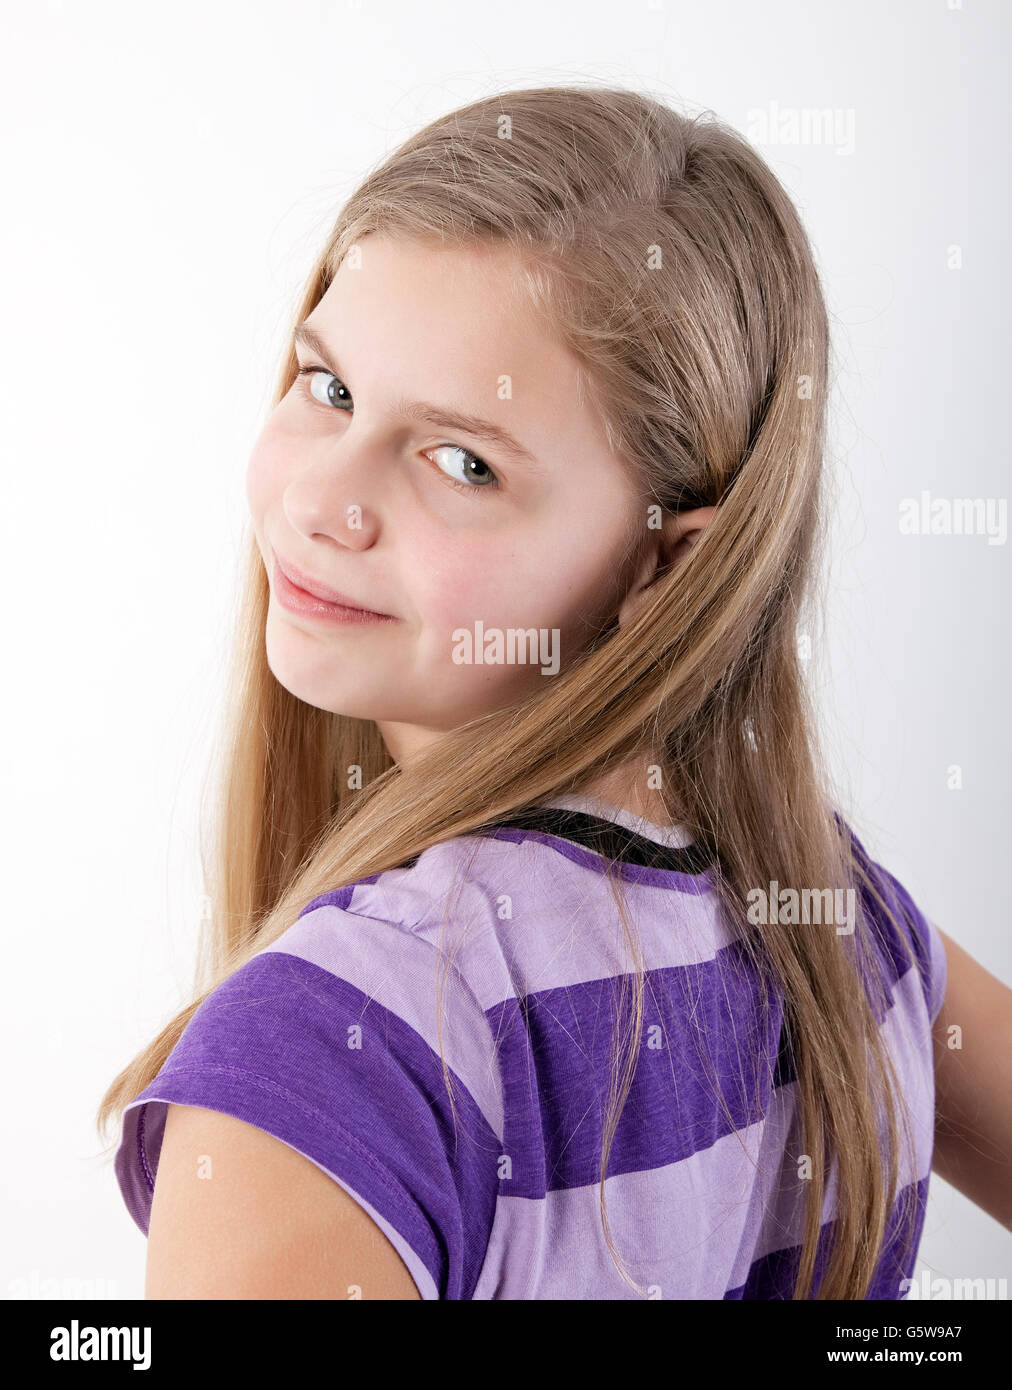 portrait of a beautiful young girl Stock Photo